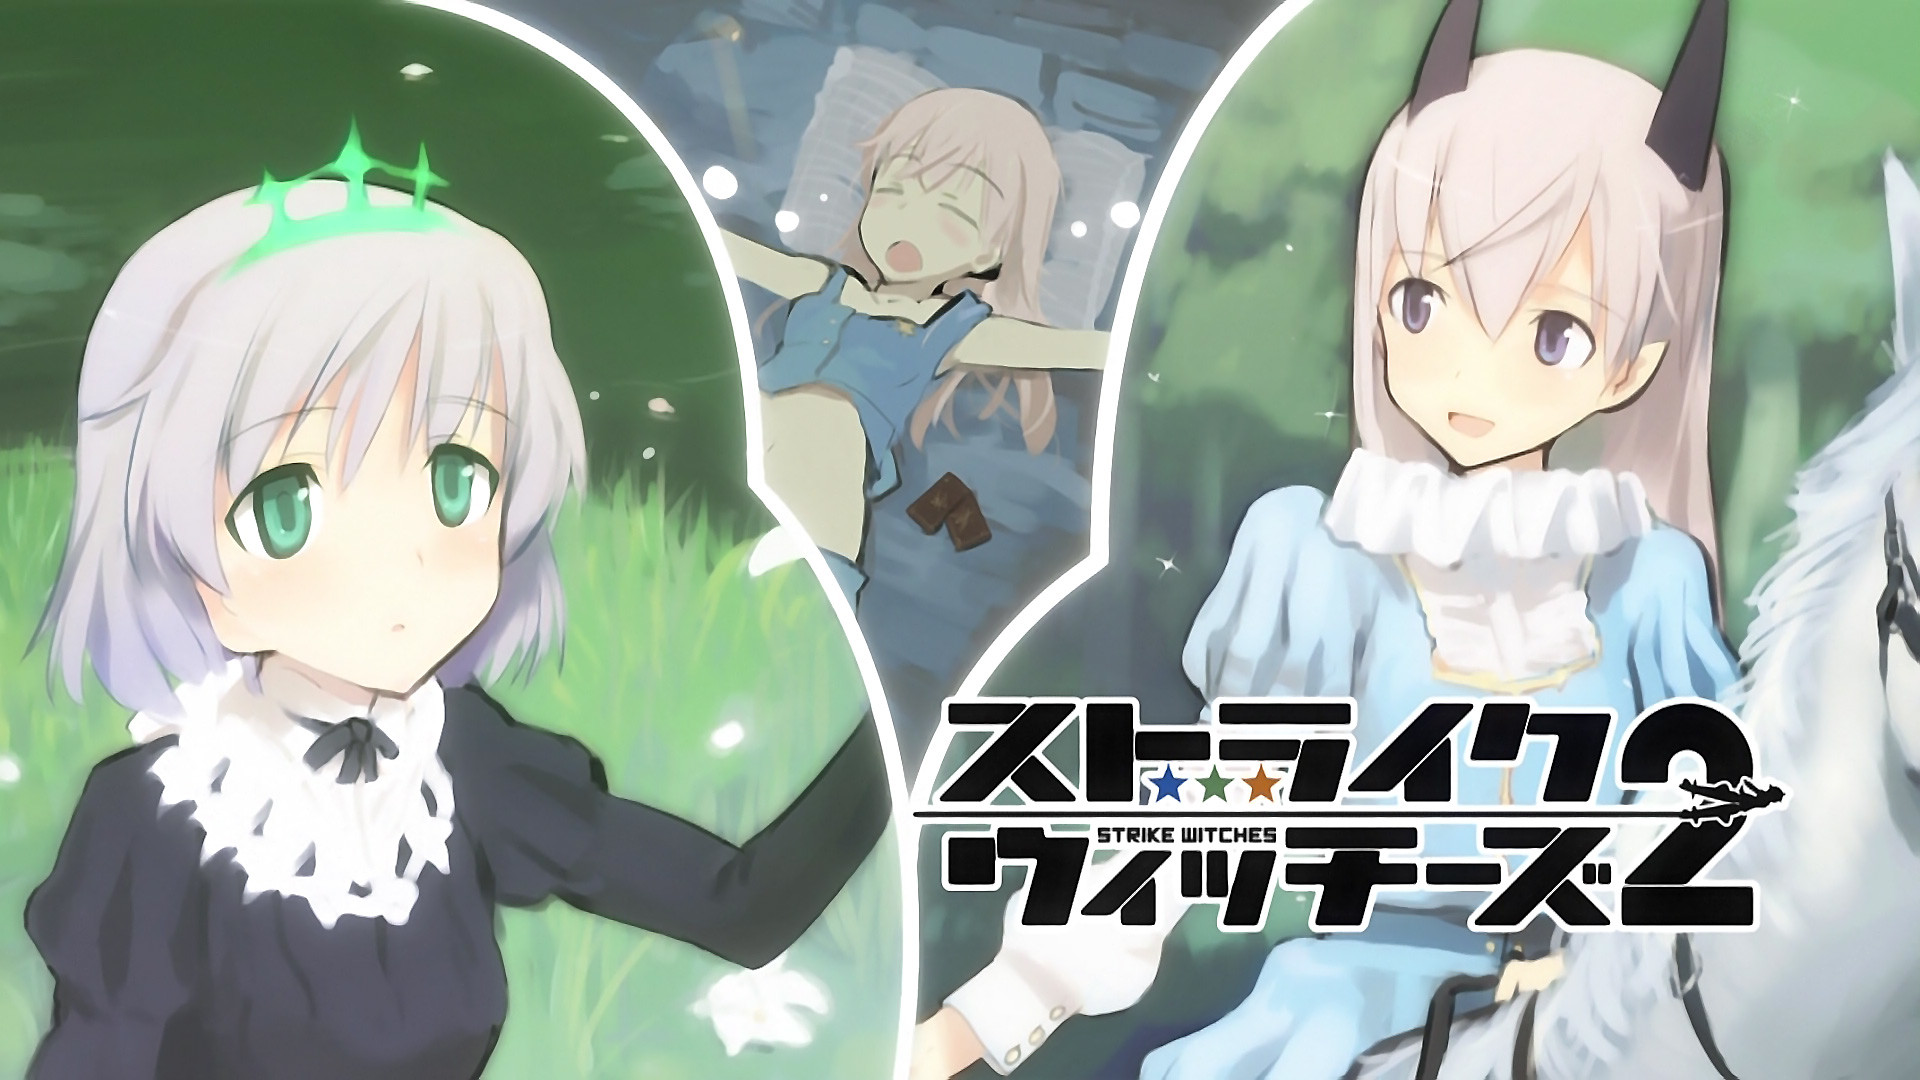 1920x1080 View Fullsize Strike Witches Image